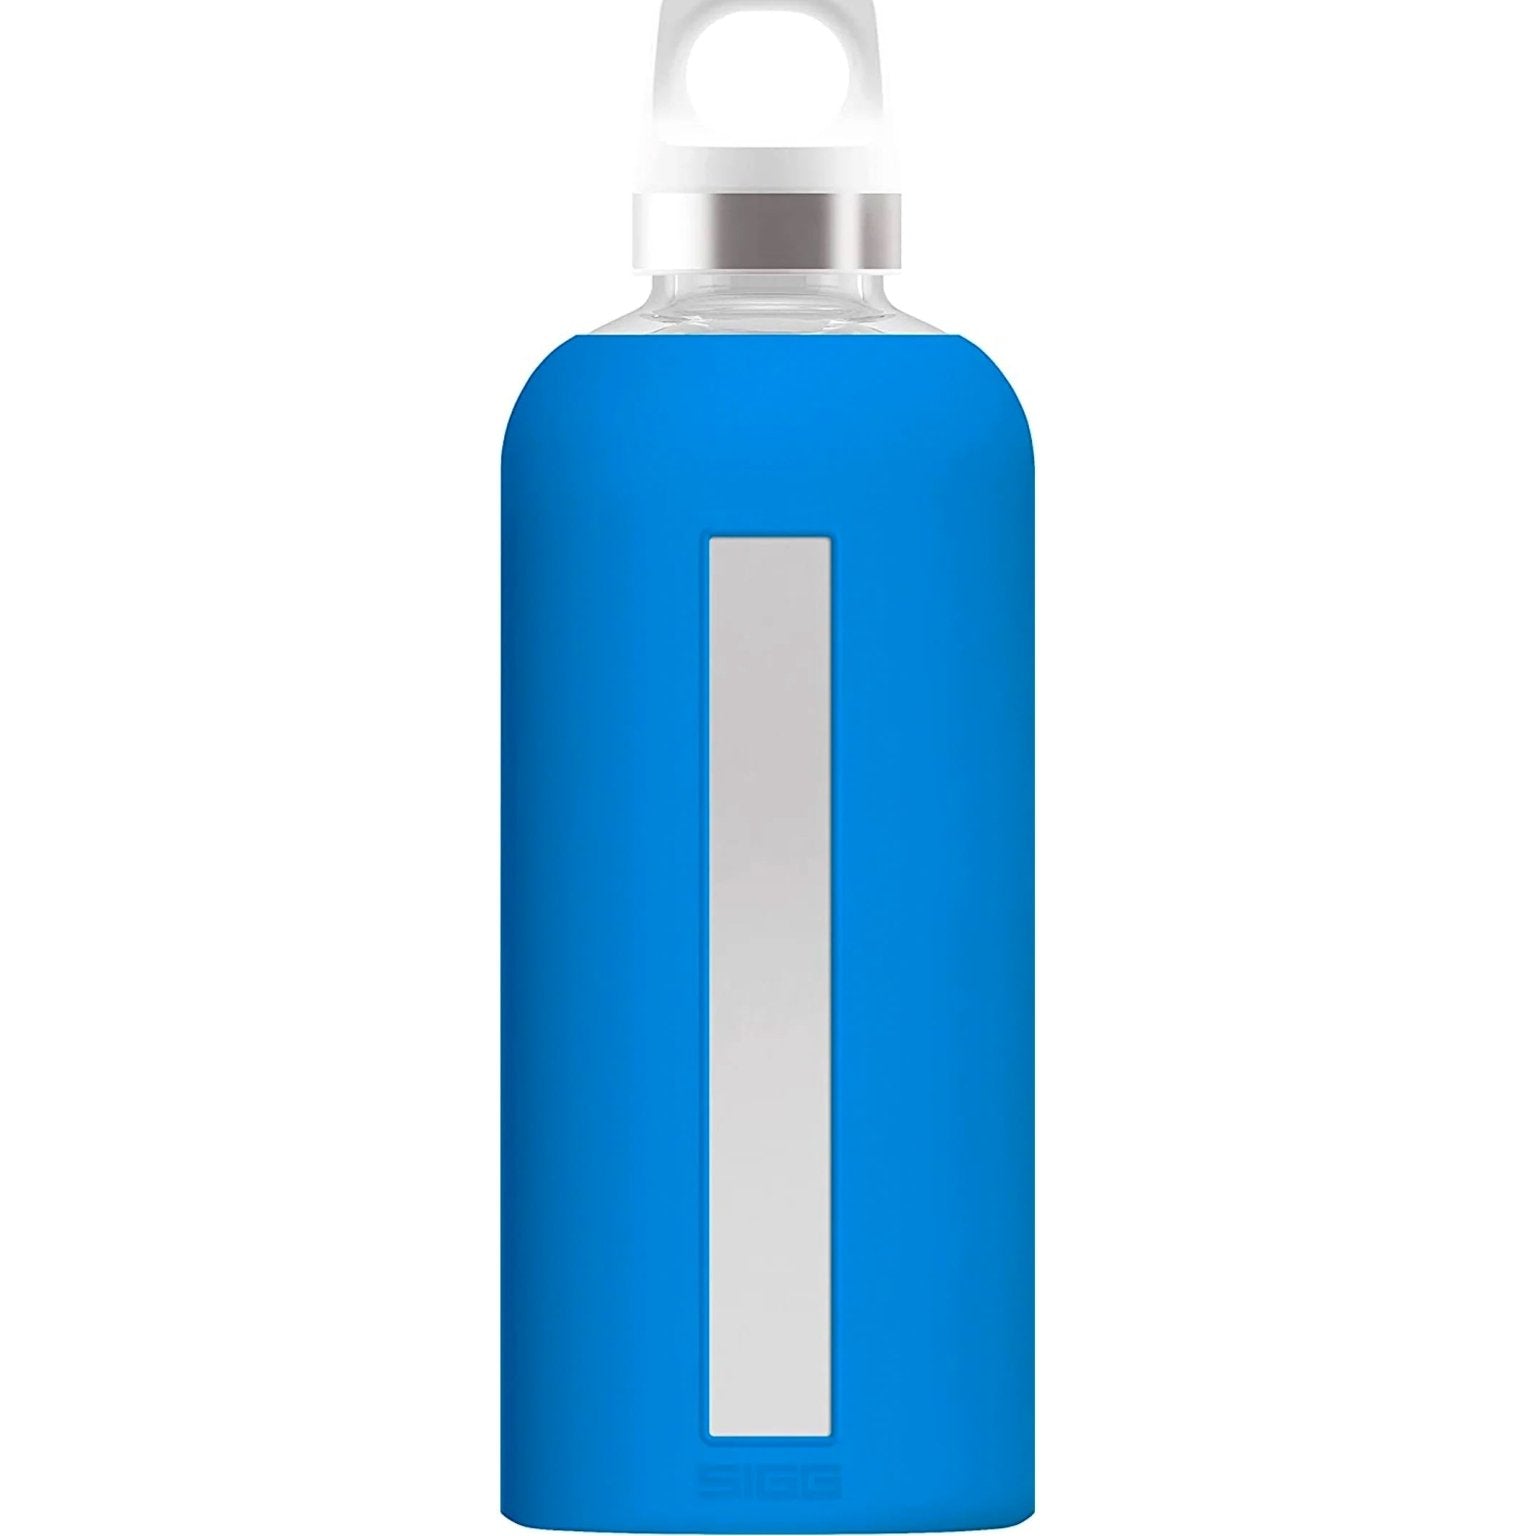 4elementsclothingSiggSIGG - Star Water Bottle, Leak-Proof Glass Bottle, Heat-Resistant with Silicone CaseWater Bottles8774.50